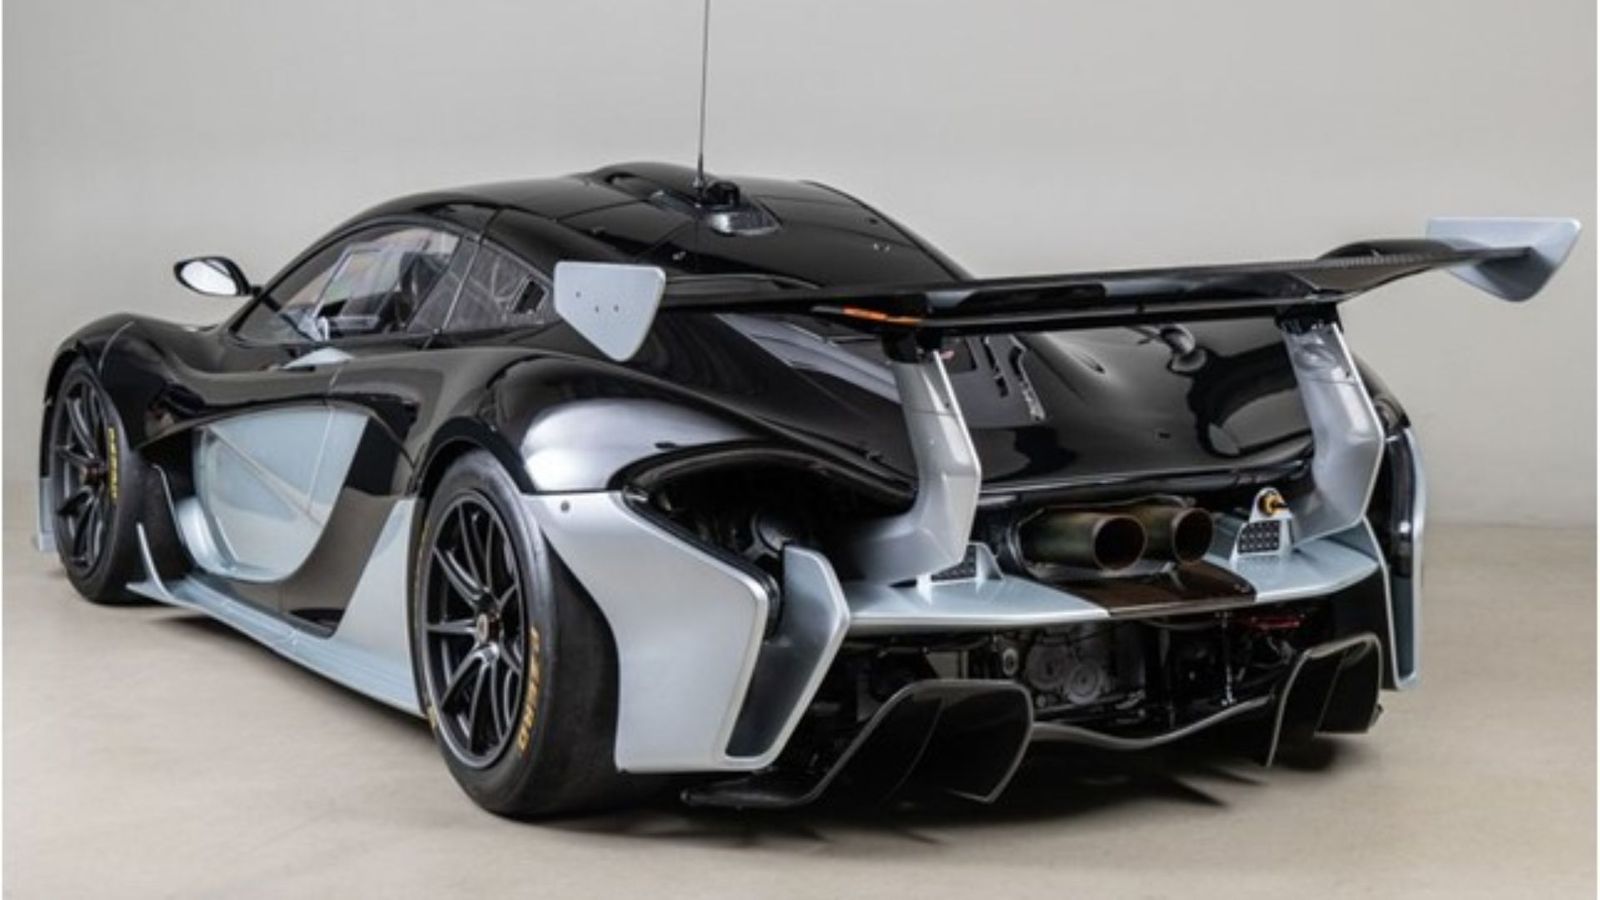 A 2016 Mclaren P1 Gtr Is Currently For Sale